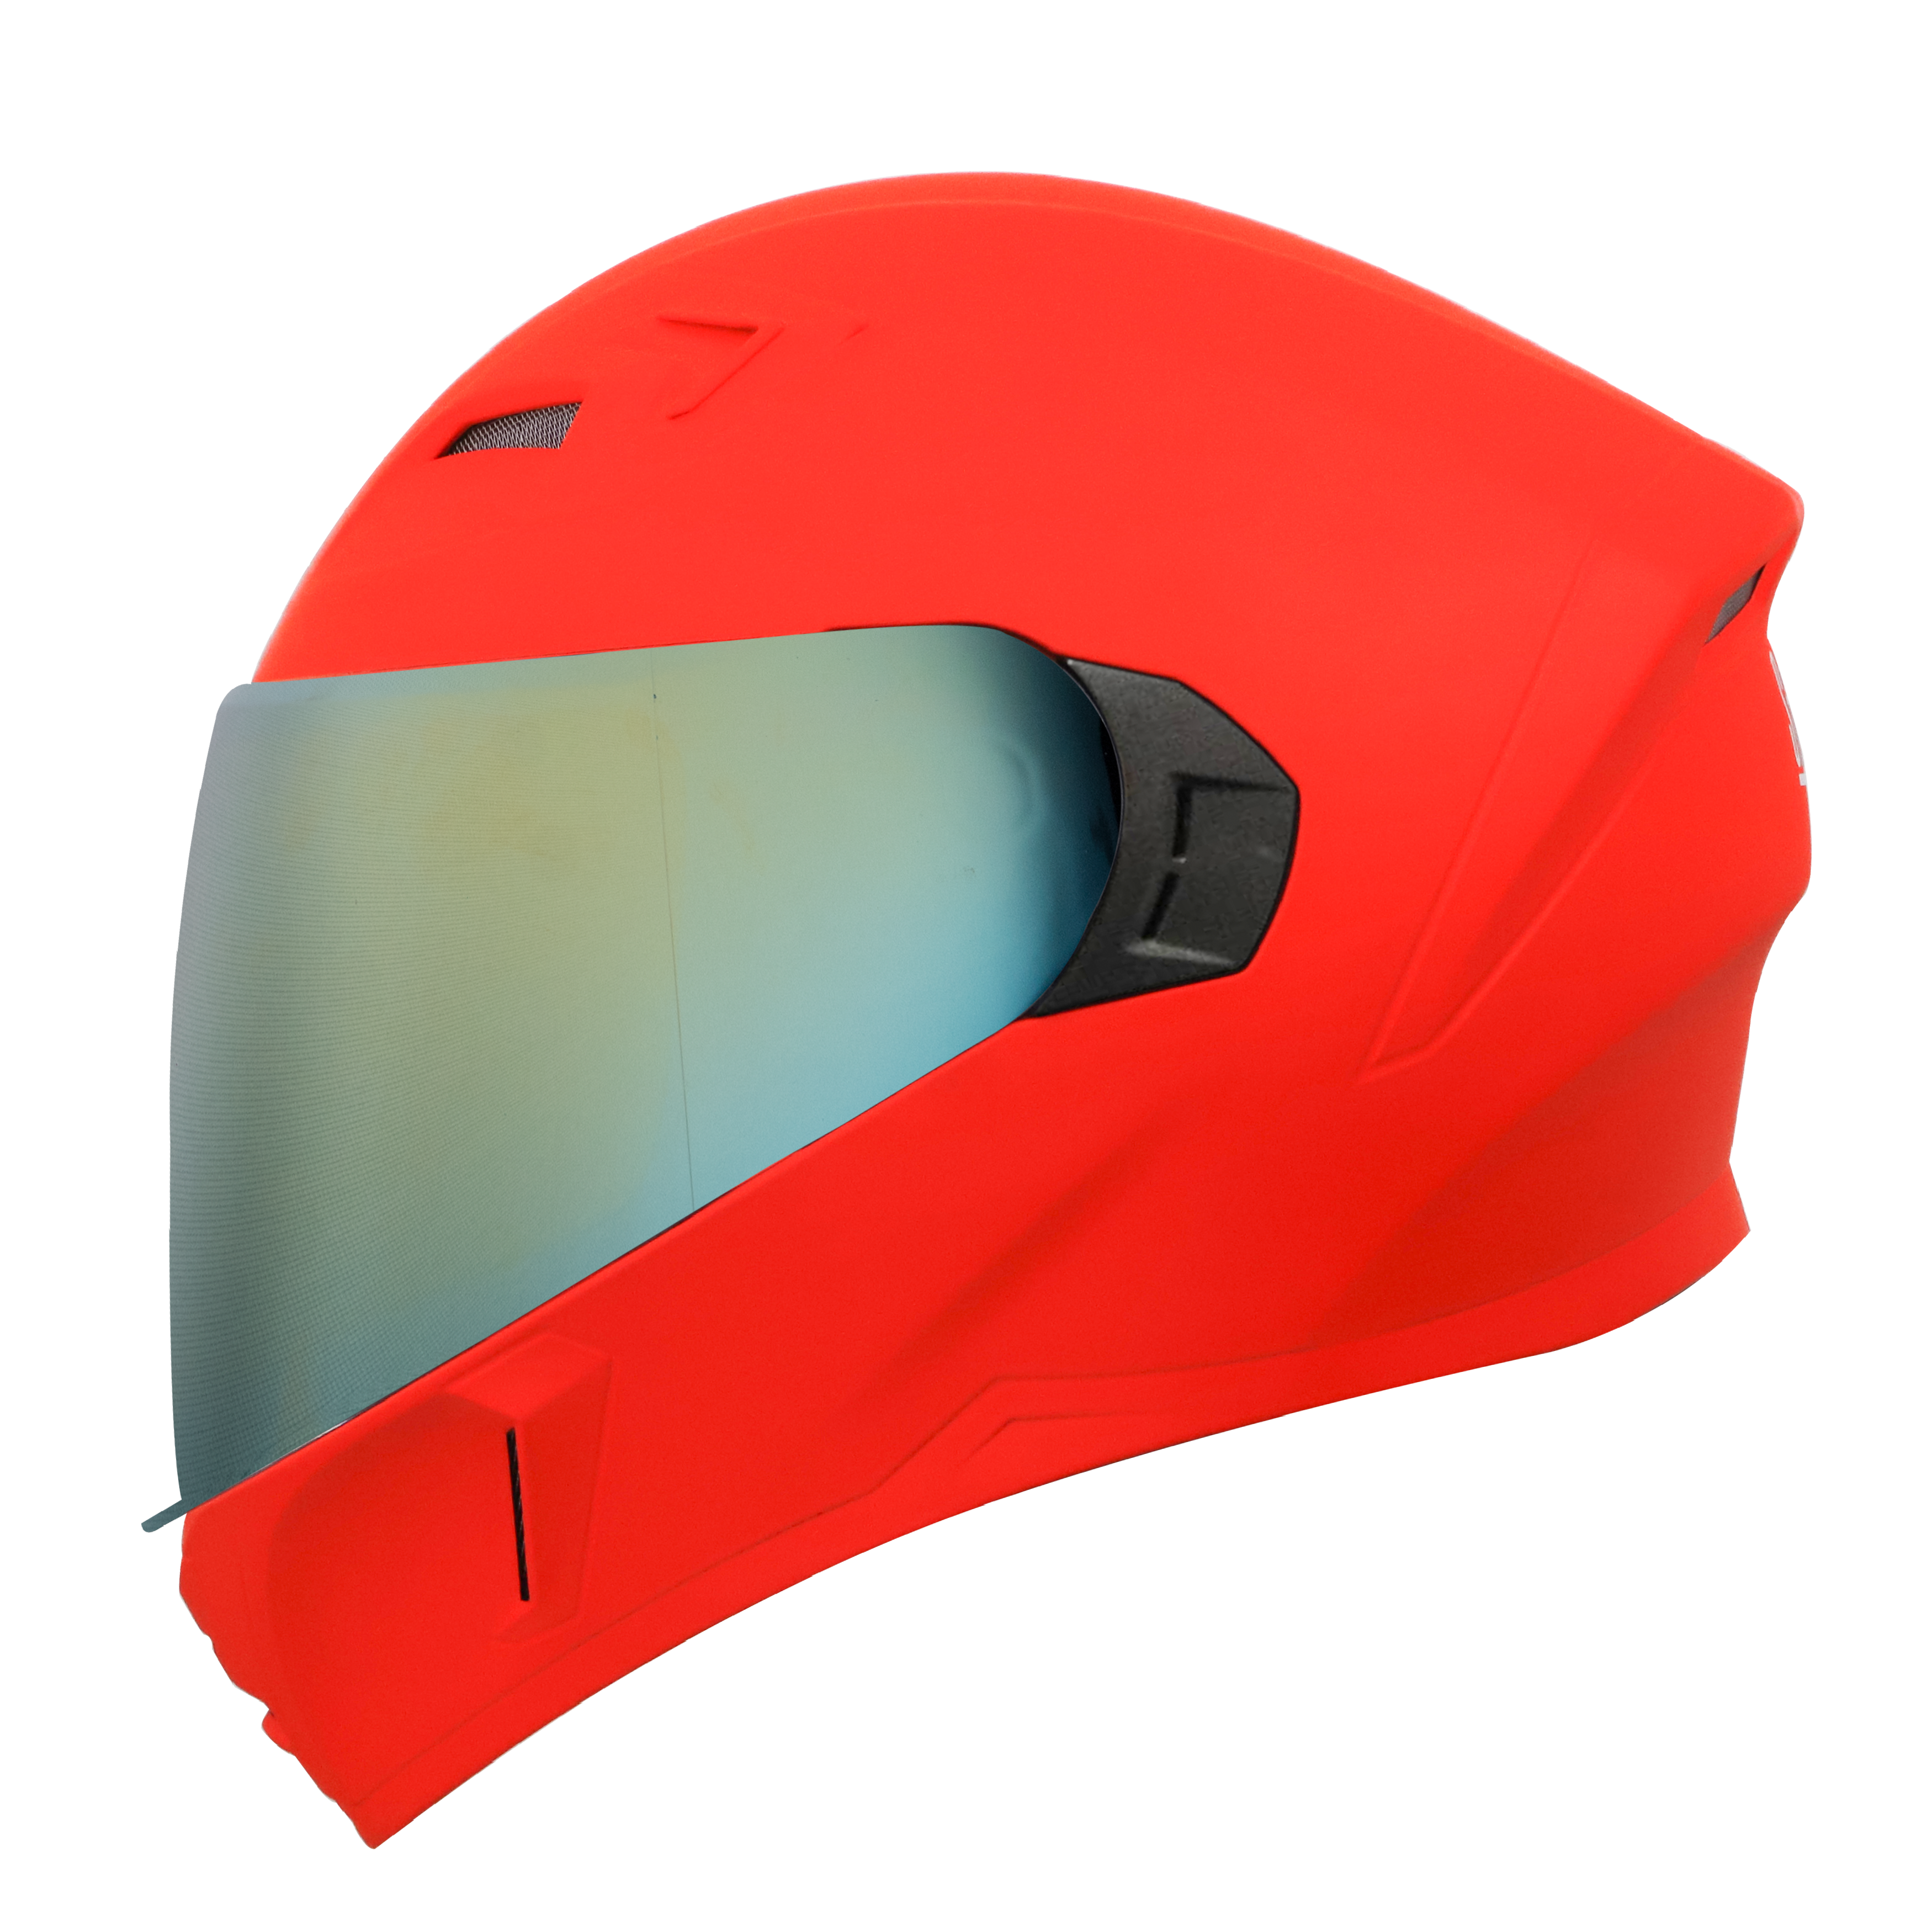 SBA-21 VFX GLOSSY FLUO RED ( FITTED WITH CLEAR VISOR EXTRA CHROME GOLD VISOR FREE)